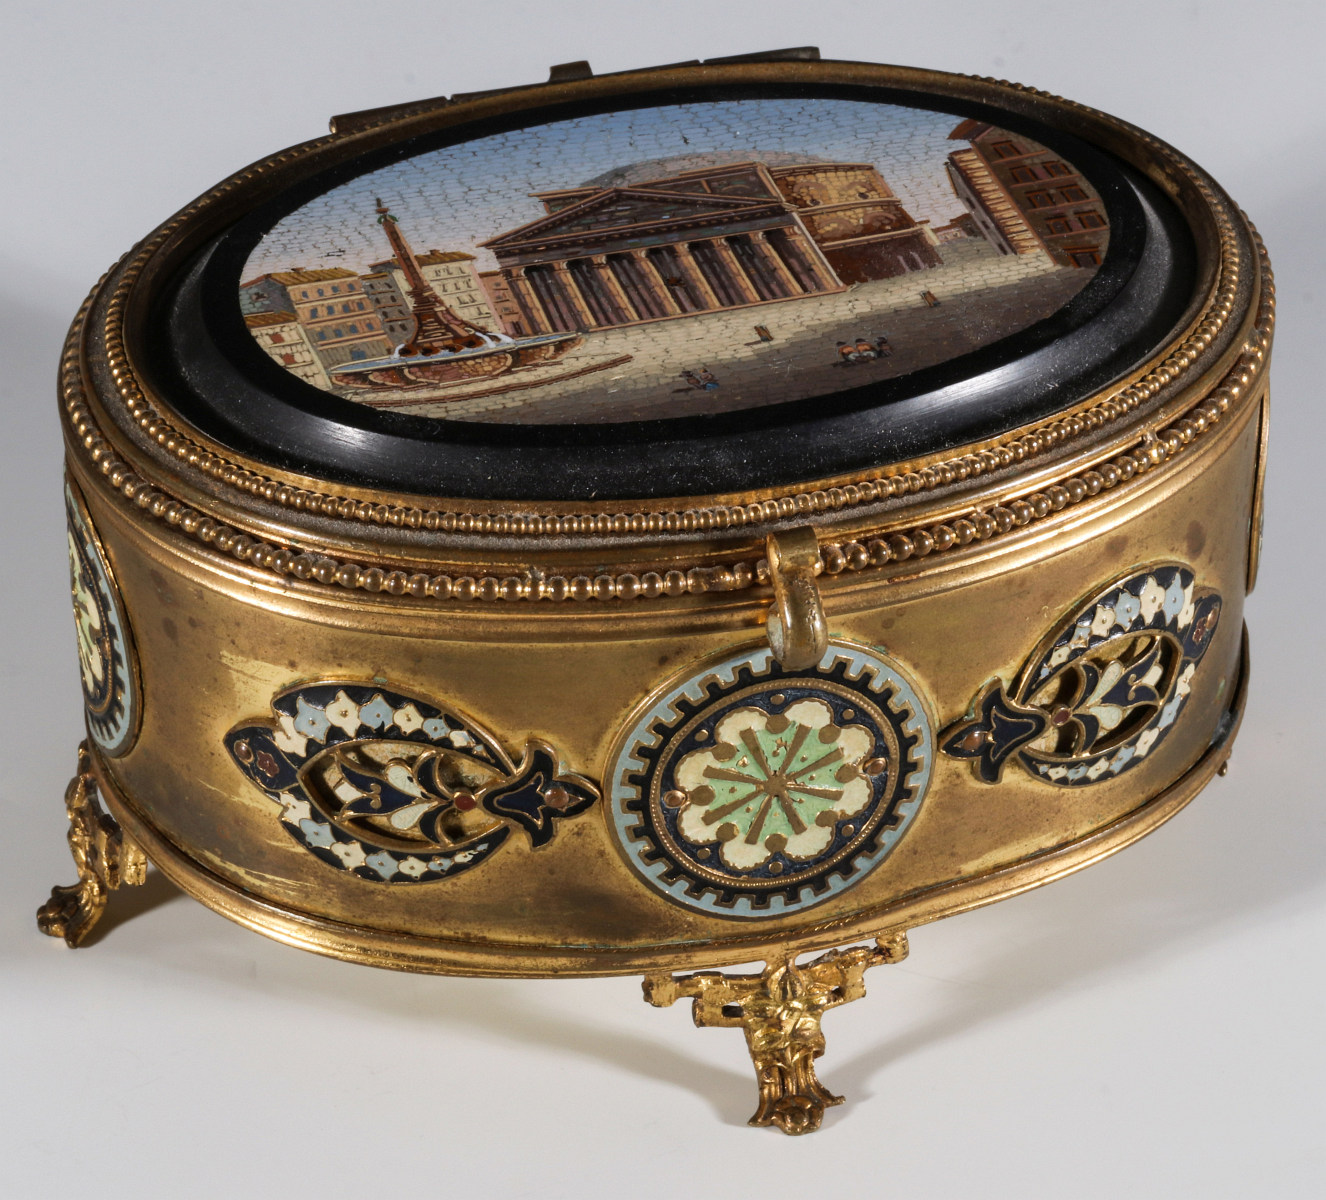 A 19TH C. GRAND TOUR TRINKET BOX WITH MICROMOSAIC